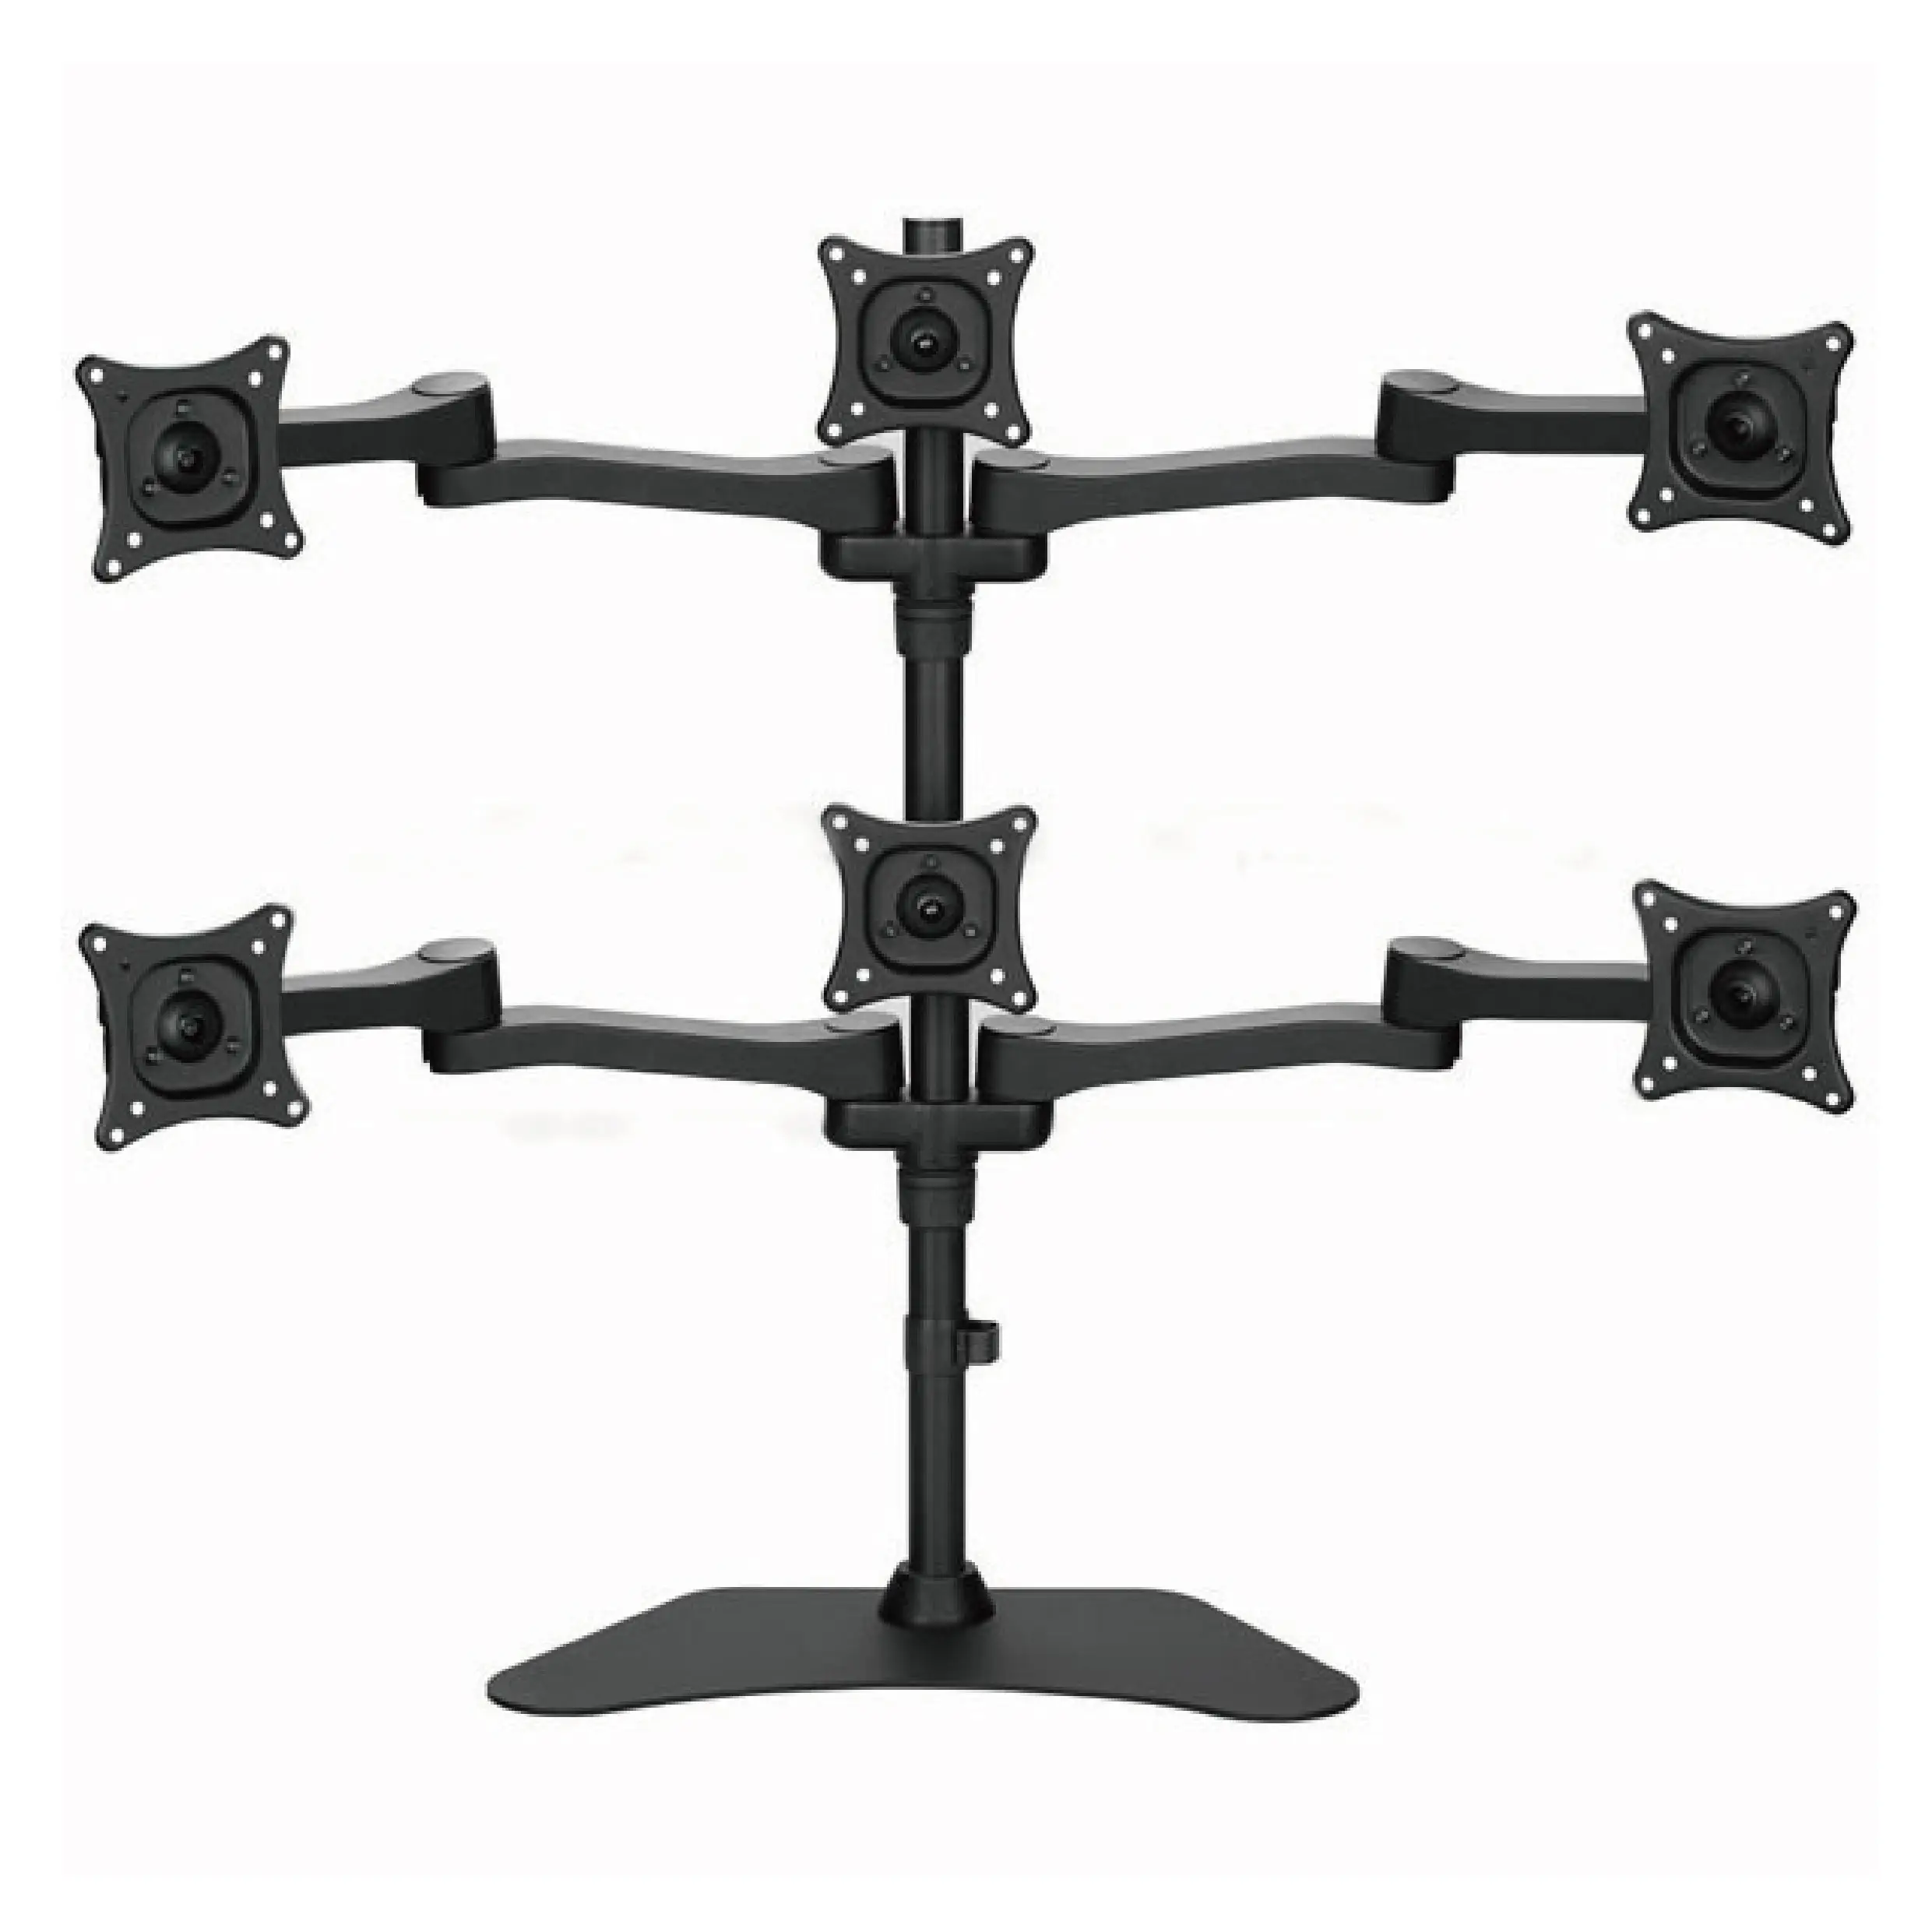 High Quality & Best Price LCD Aluminum Monitor Mount,Swivel LCD Bracket,Table LCD Mount Arm For 10'' to 24''